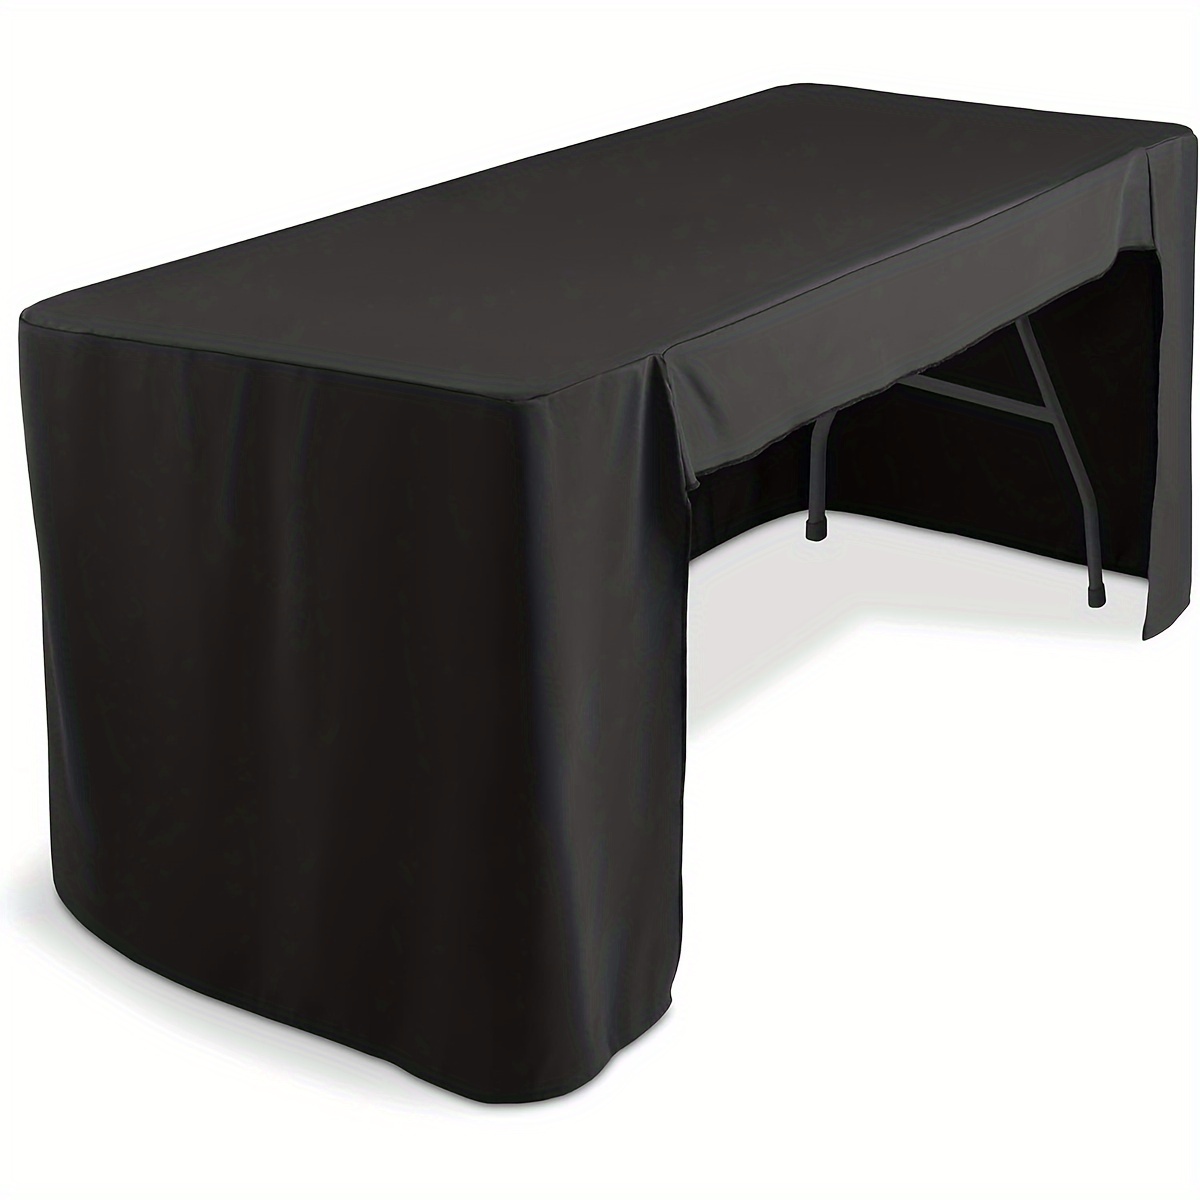 

1pc, Table Cover, Black Fitted Tablecloth For Rectangle Table, Polyester Washable Trade Show Table Cover With Open Back For Folding Tables, Craft Fairs, Display, Parties, Weddings, Events